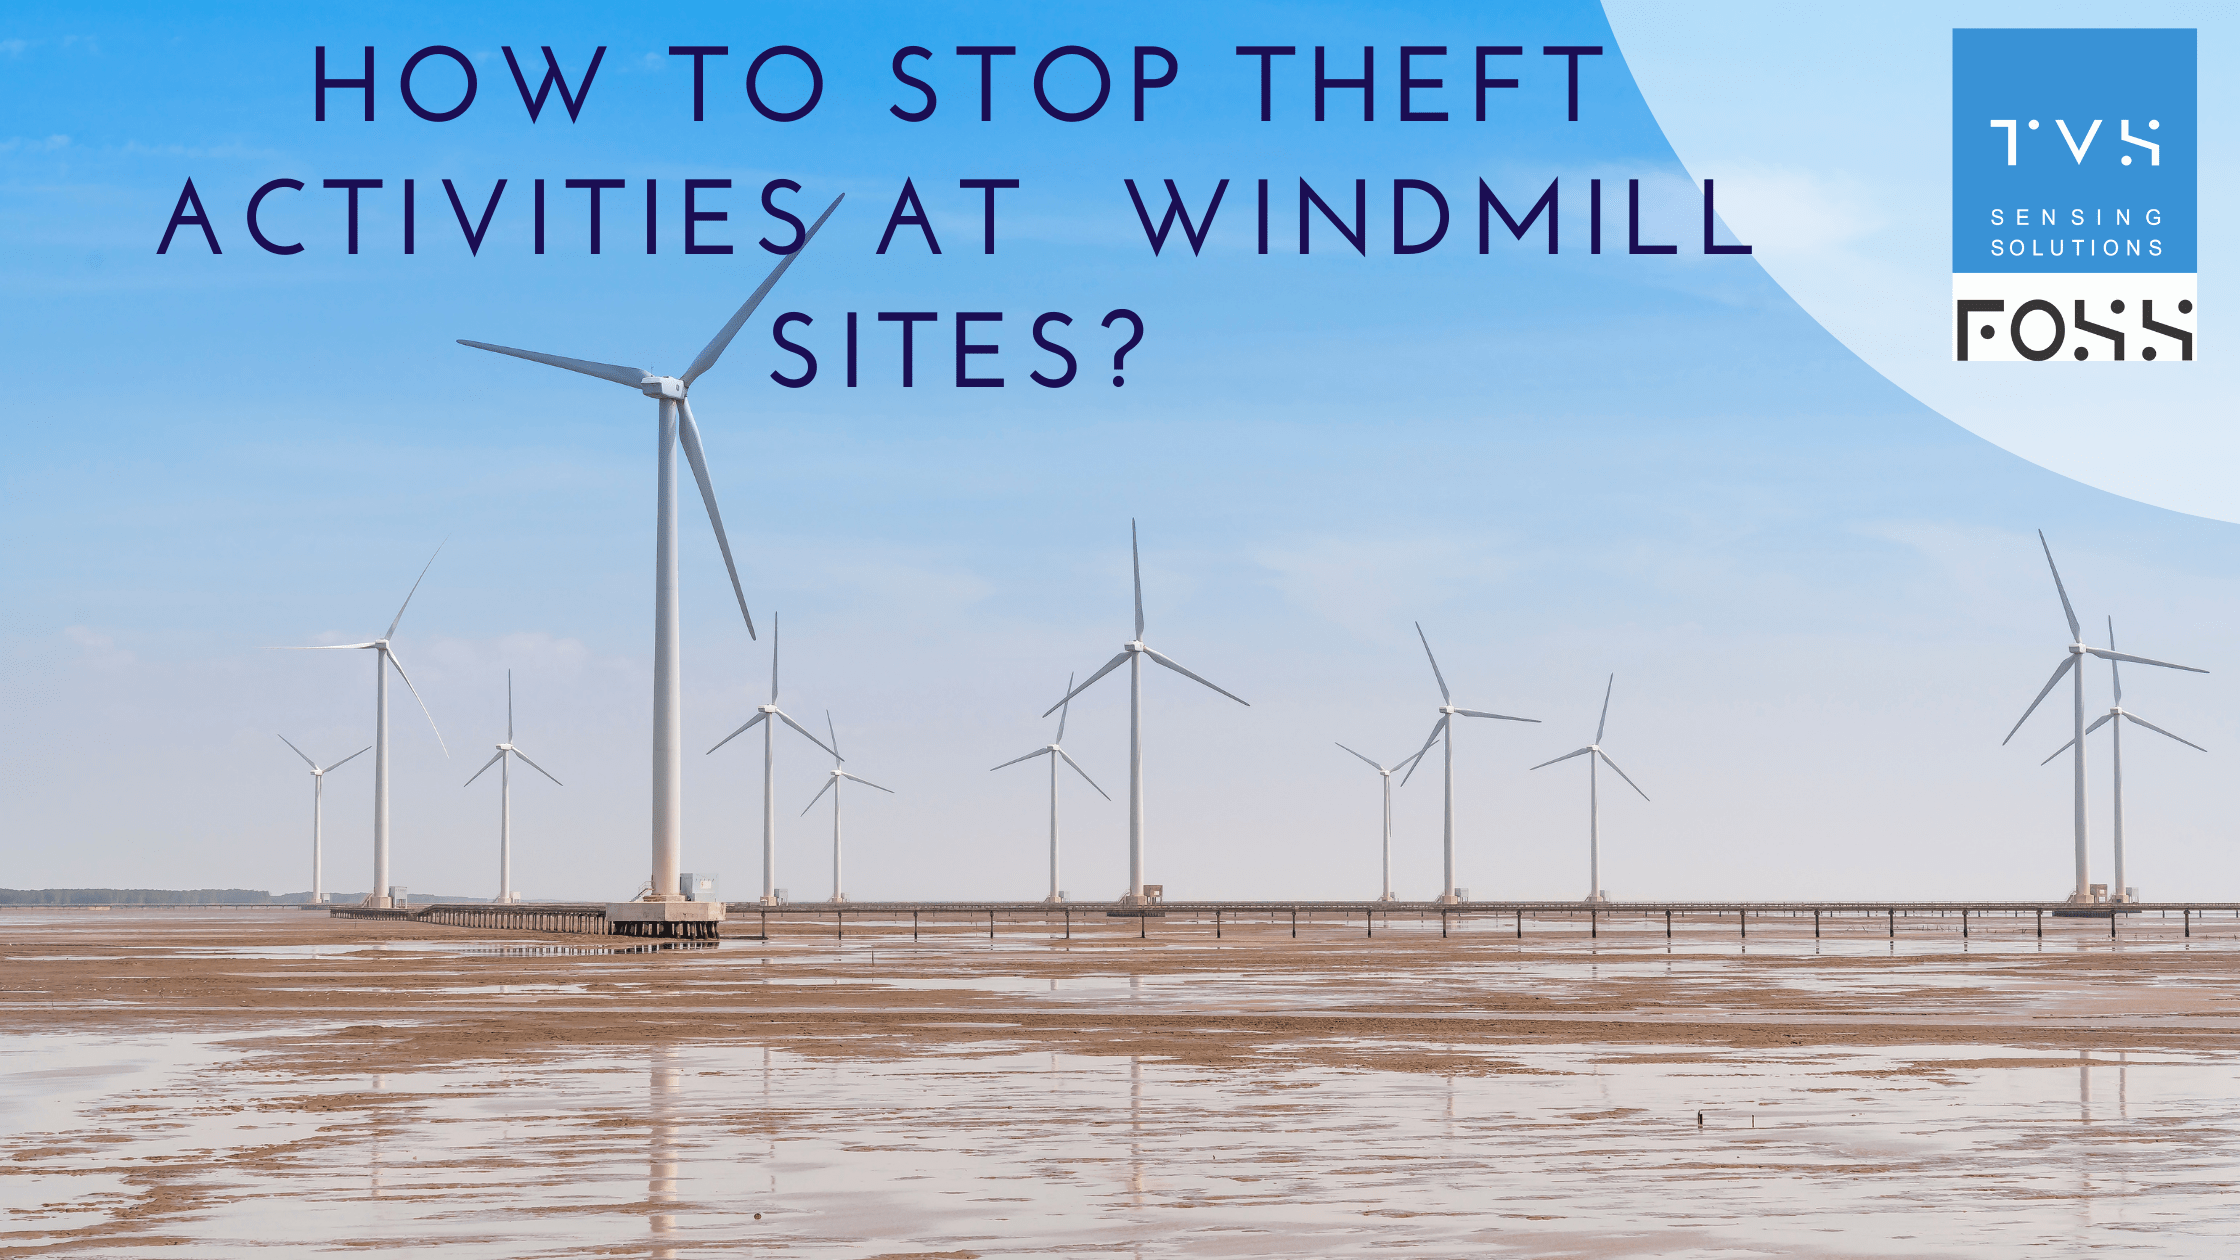 How to stop theft activities at windmill sites?